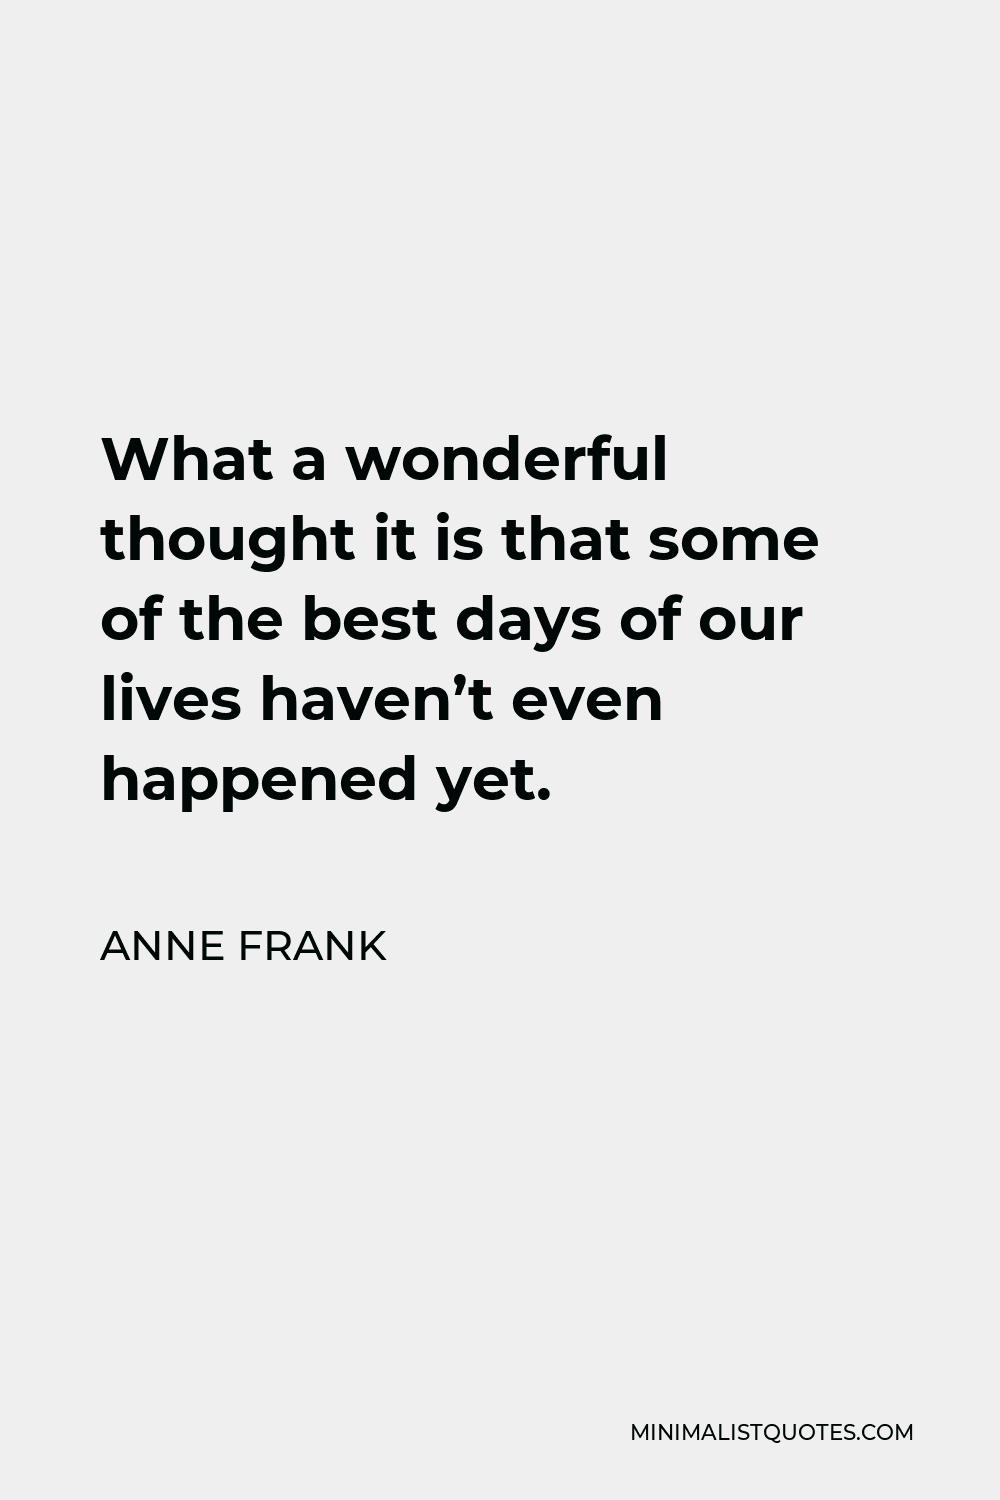 Anne Frank Quote - What a wonderful thought it is that some of the best days of our lives haven’t even happened yet.